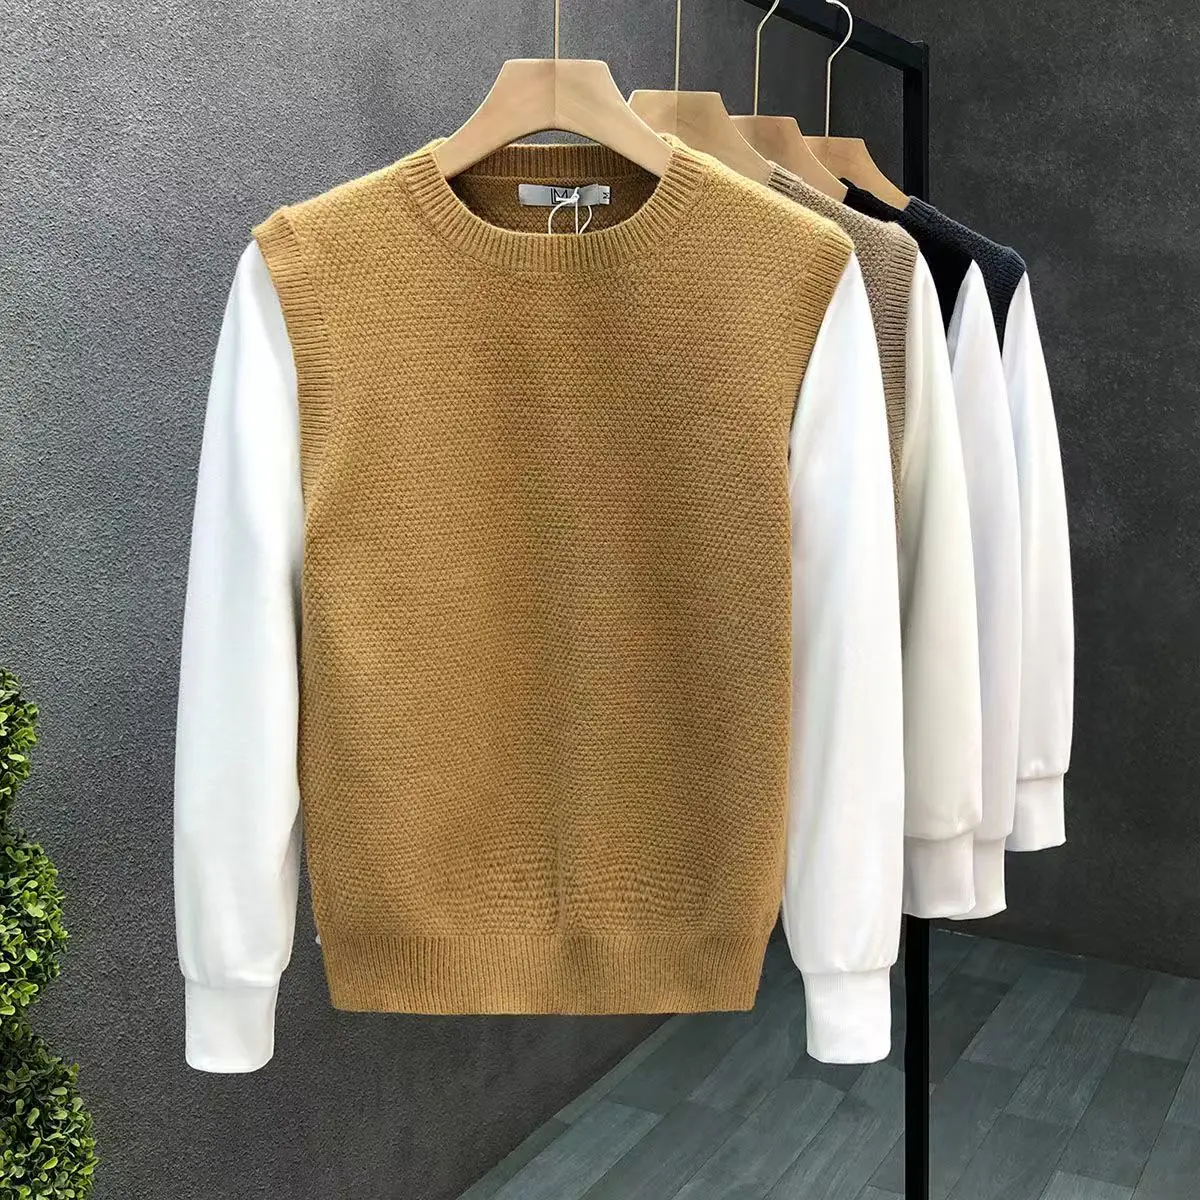 

Fashion O-Neck Spliced Fake Two Piece Sweater Men's Clothing Autumn Winter New Loose Casual Pullovers Kint Sweater Tops